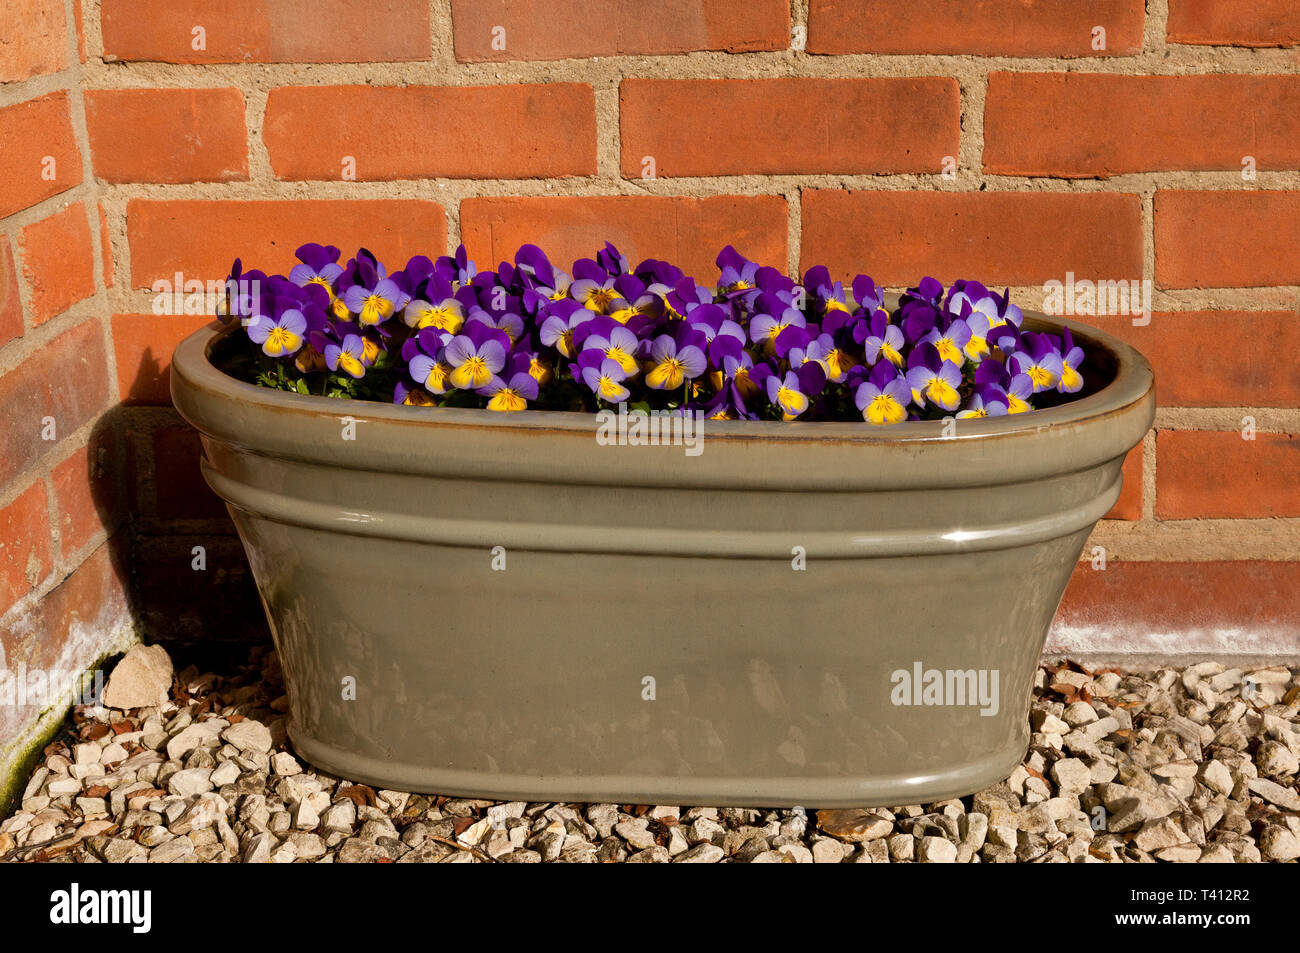 Viola flowers peeping out from a flower planter Stock Photo